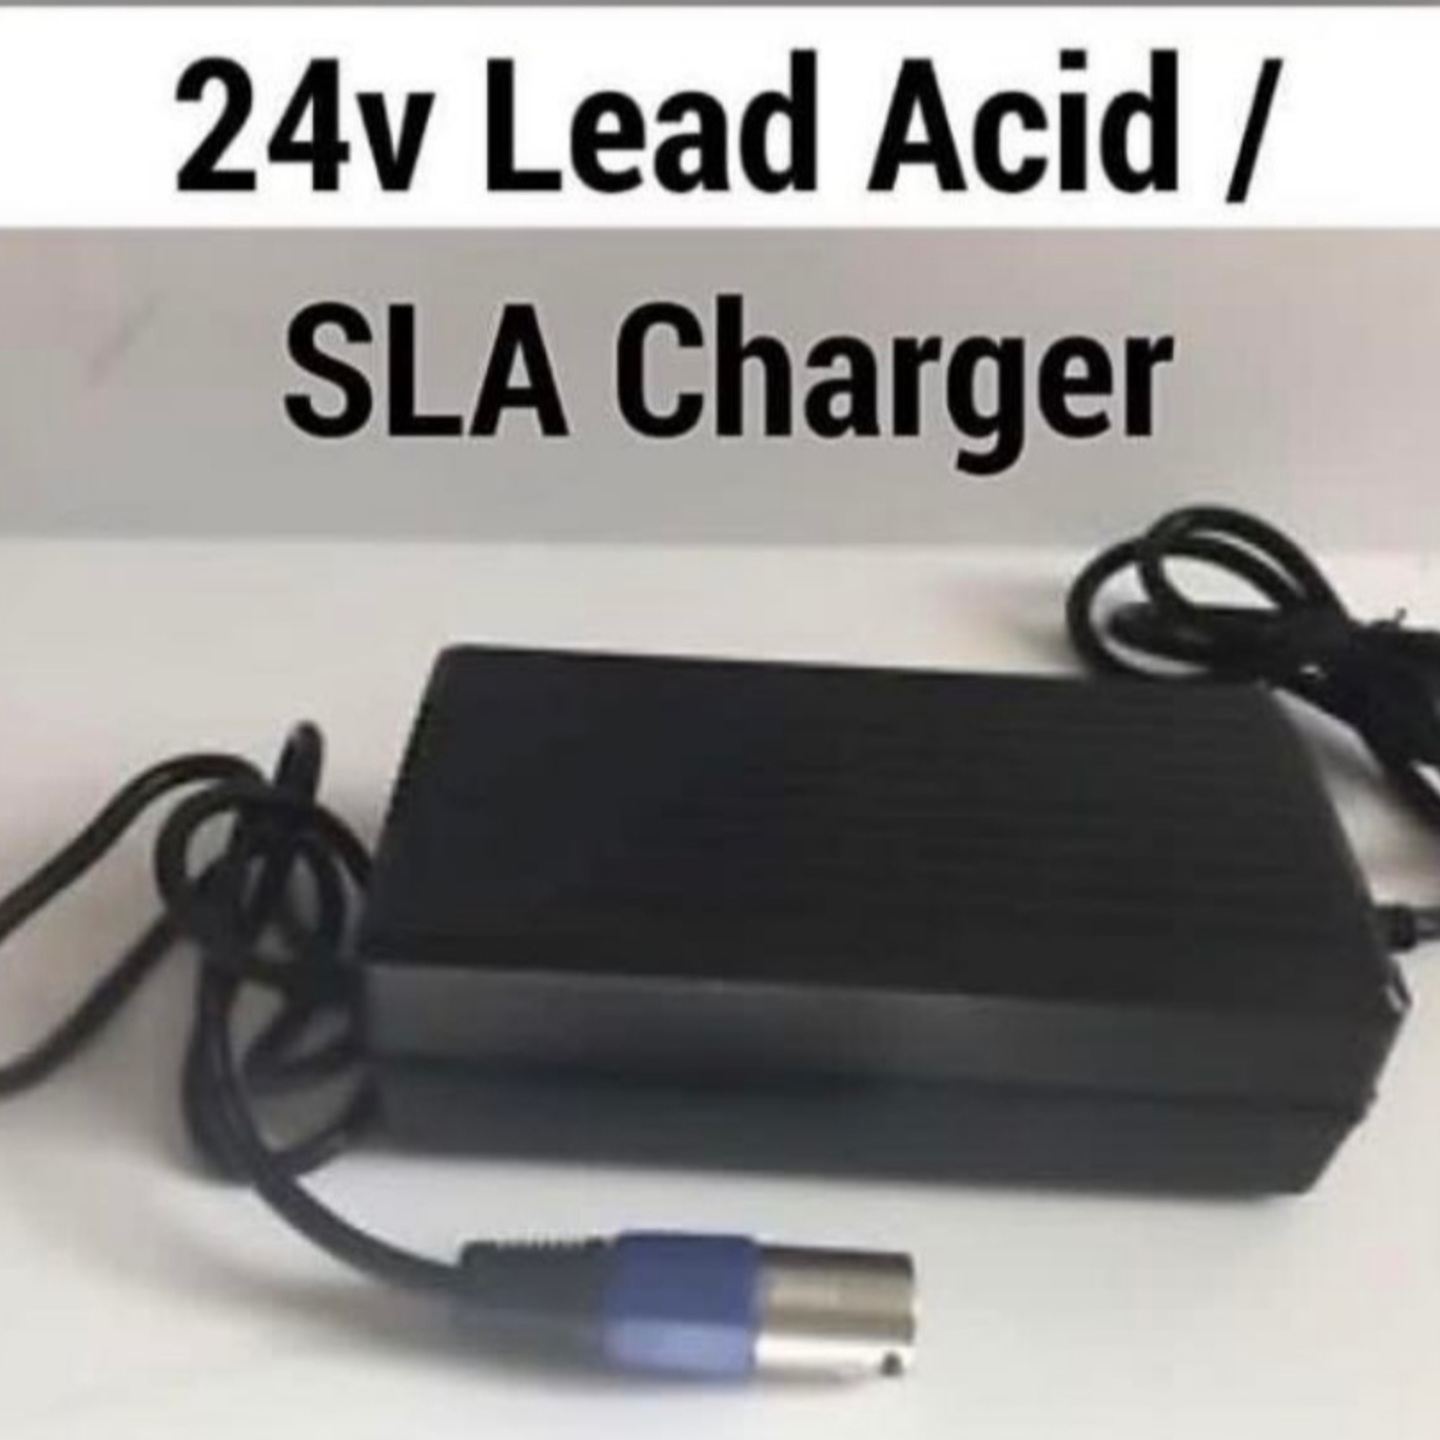 24v 4A charger for wheelchair with lead acid battery